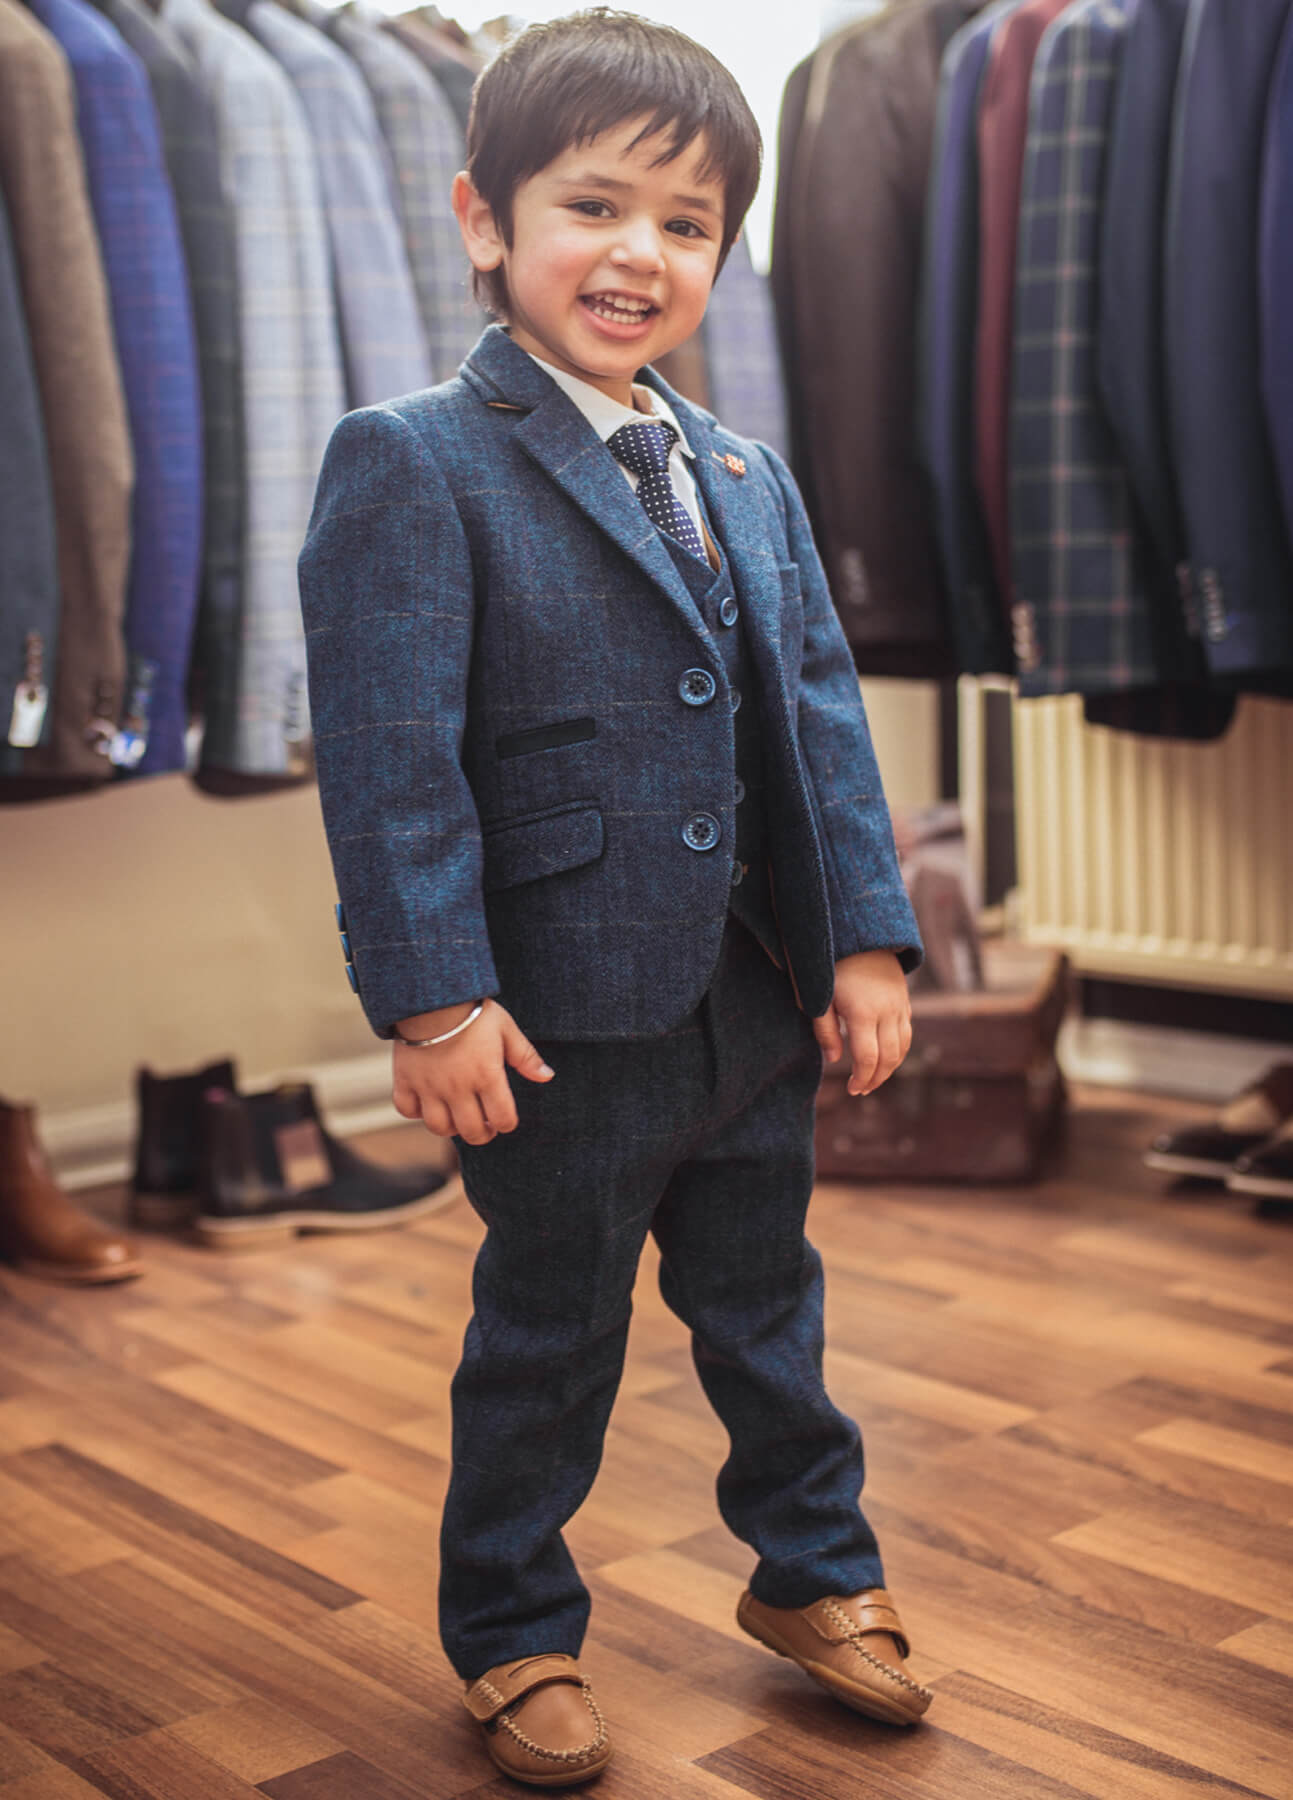 Young boy modelling the Carnegi suit